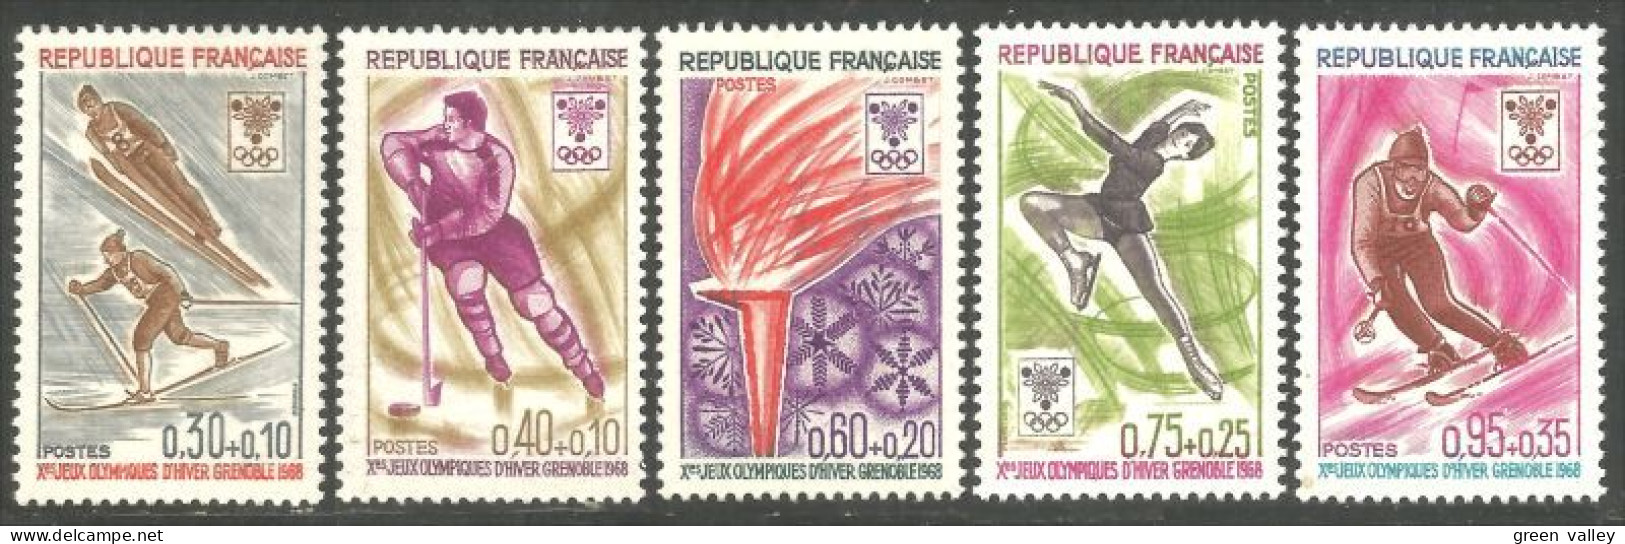 345 France Yv 1543-1547 Olympiques Grenoble Olympics 1968 MNH ** Neuf SC (1543-1547-1c) - Hiver